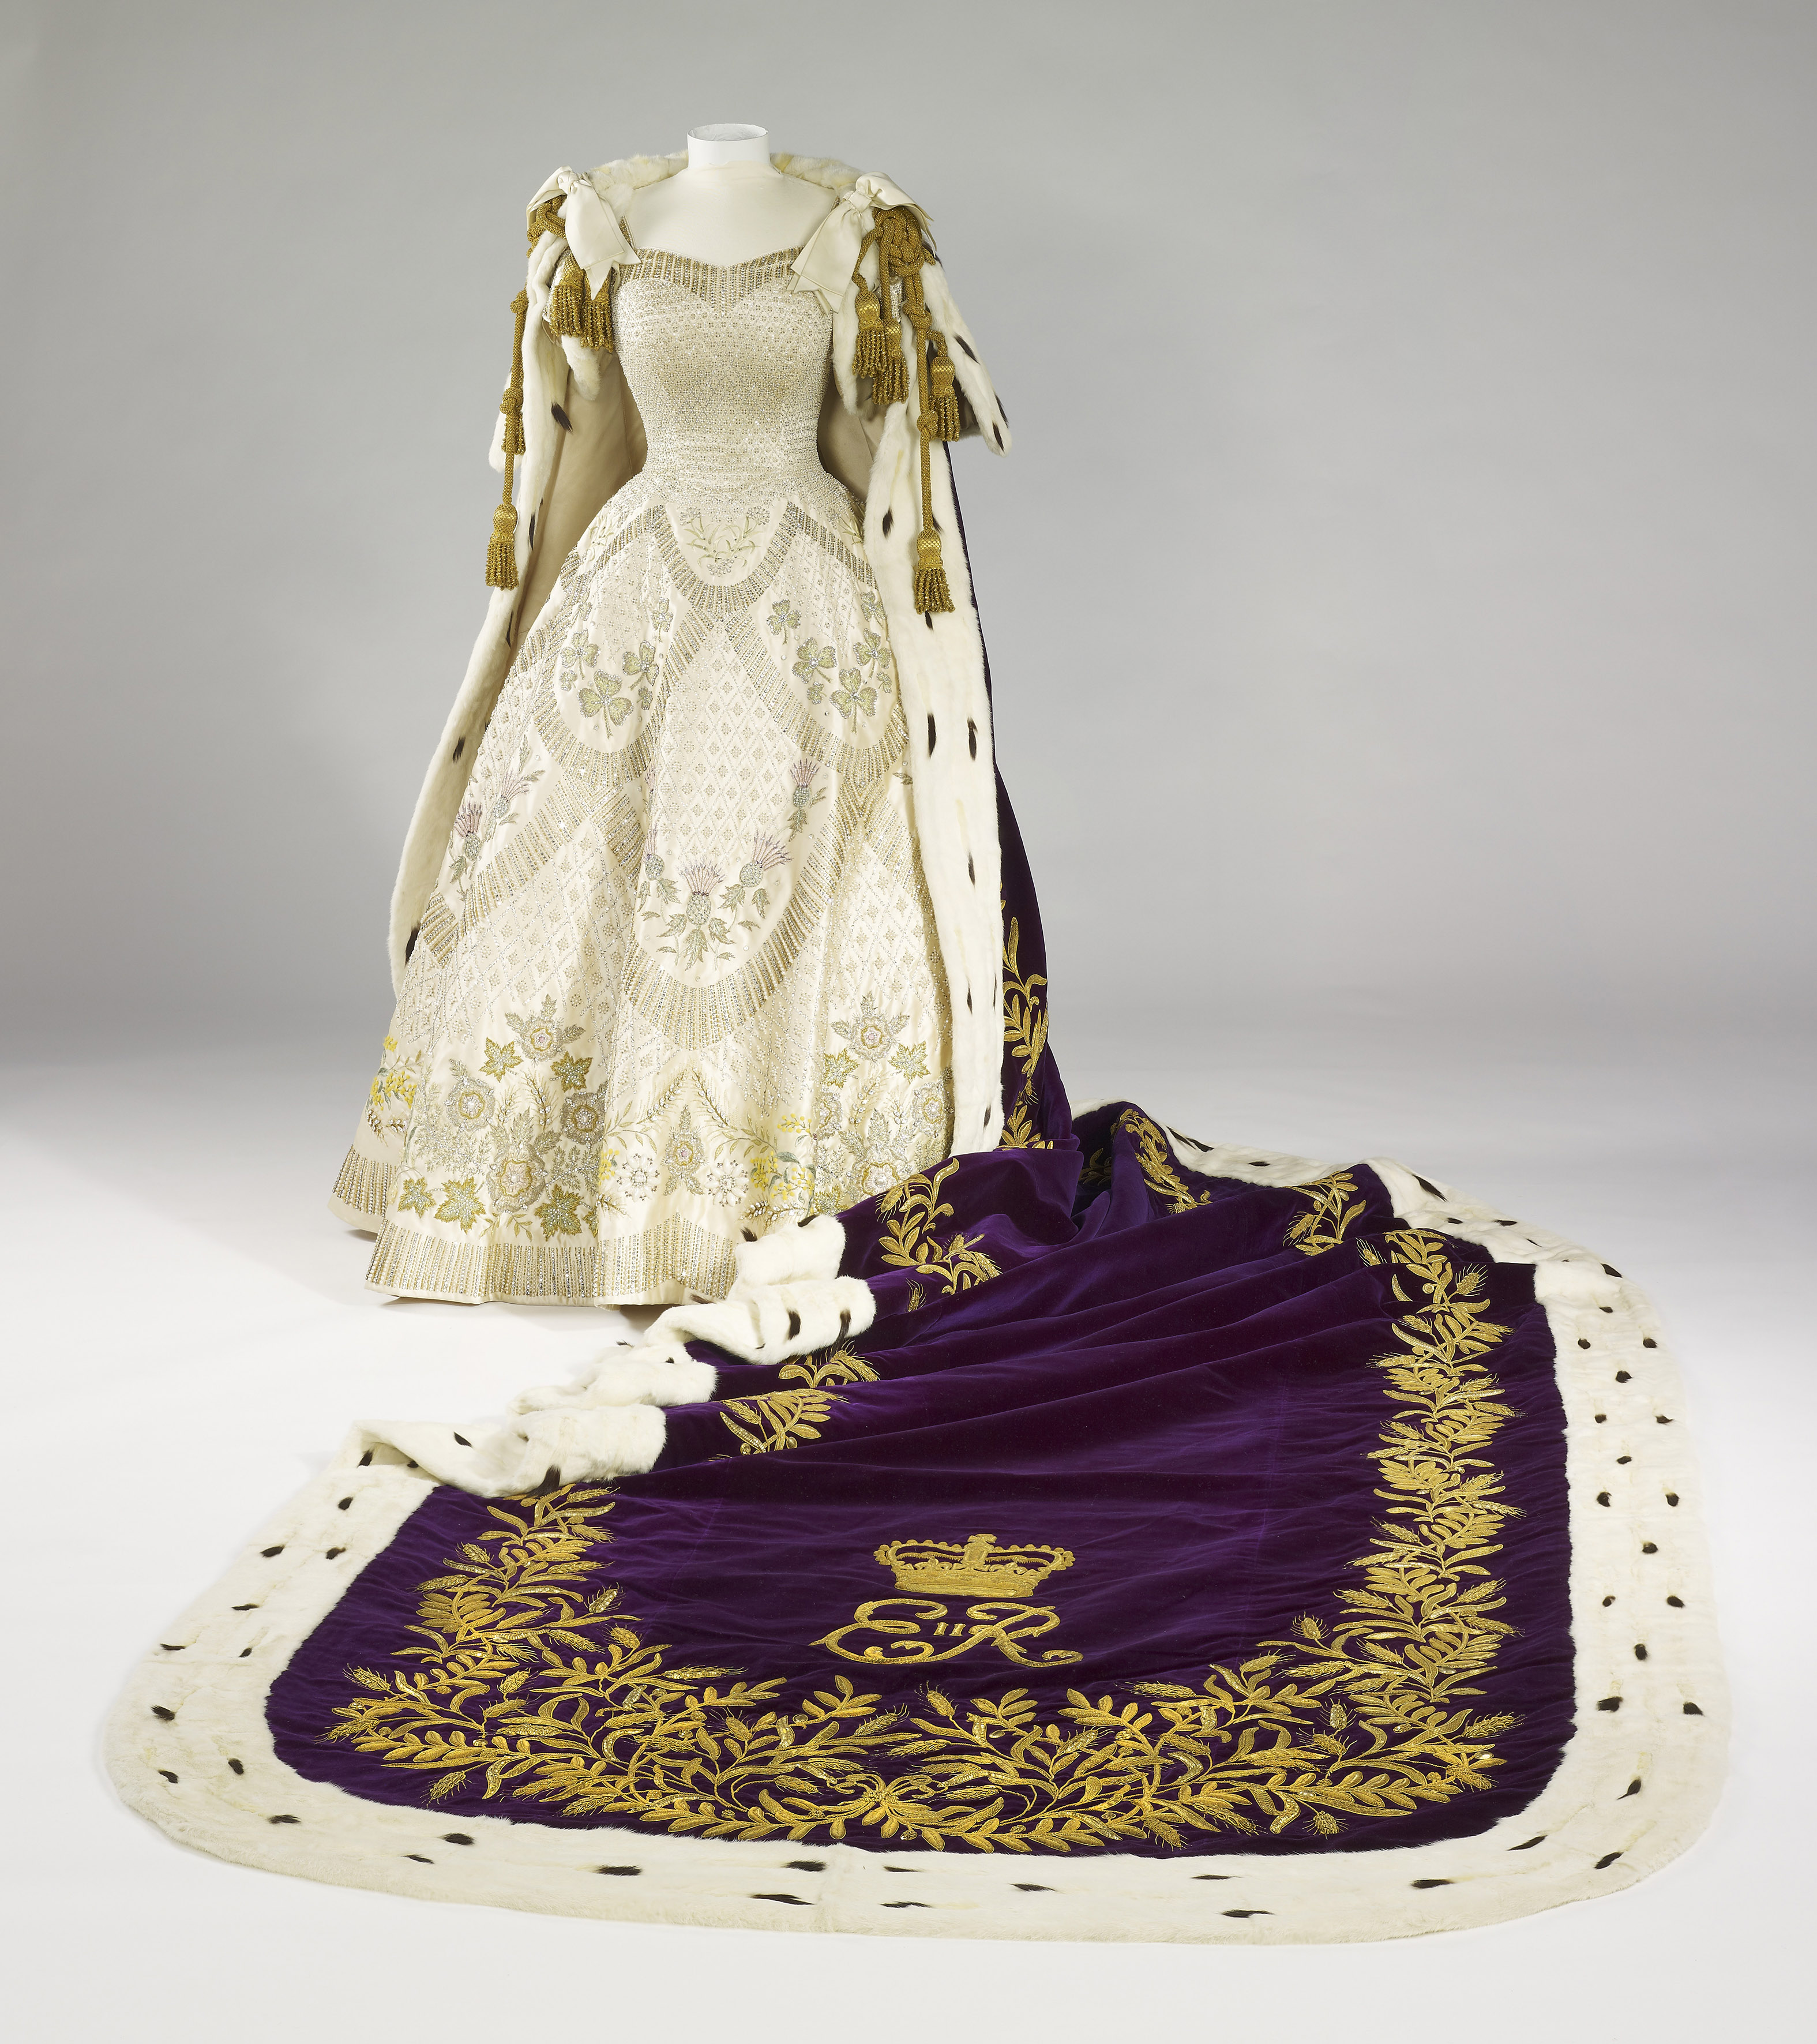 Accession, coronation and jubilee displays to mark Queen’s Platinum